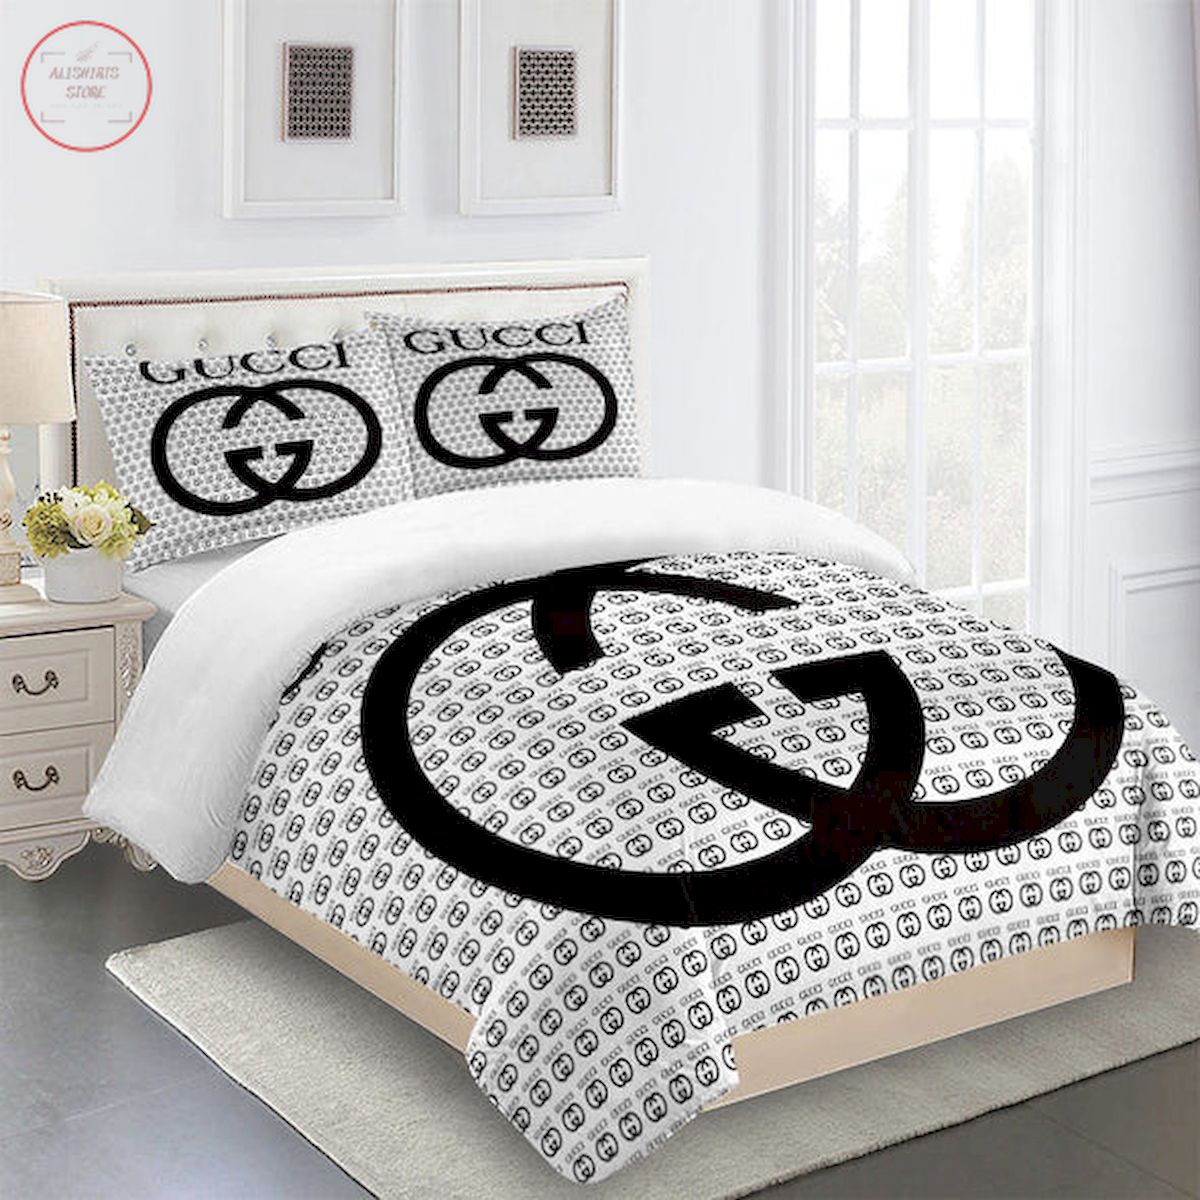 Gucci bedding set white and black Luxury bed sheets